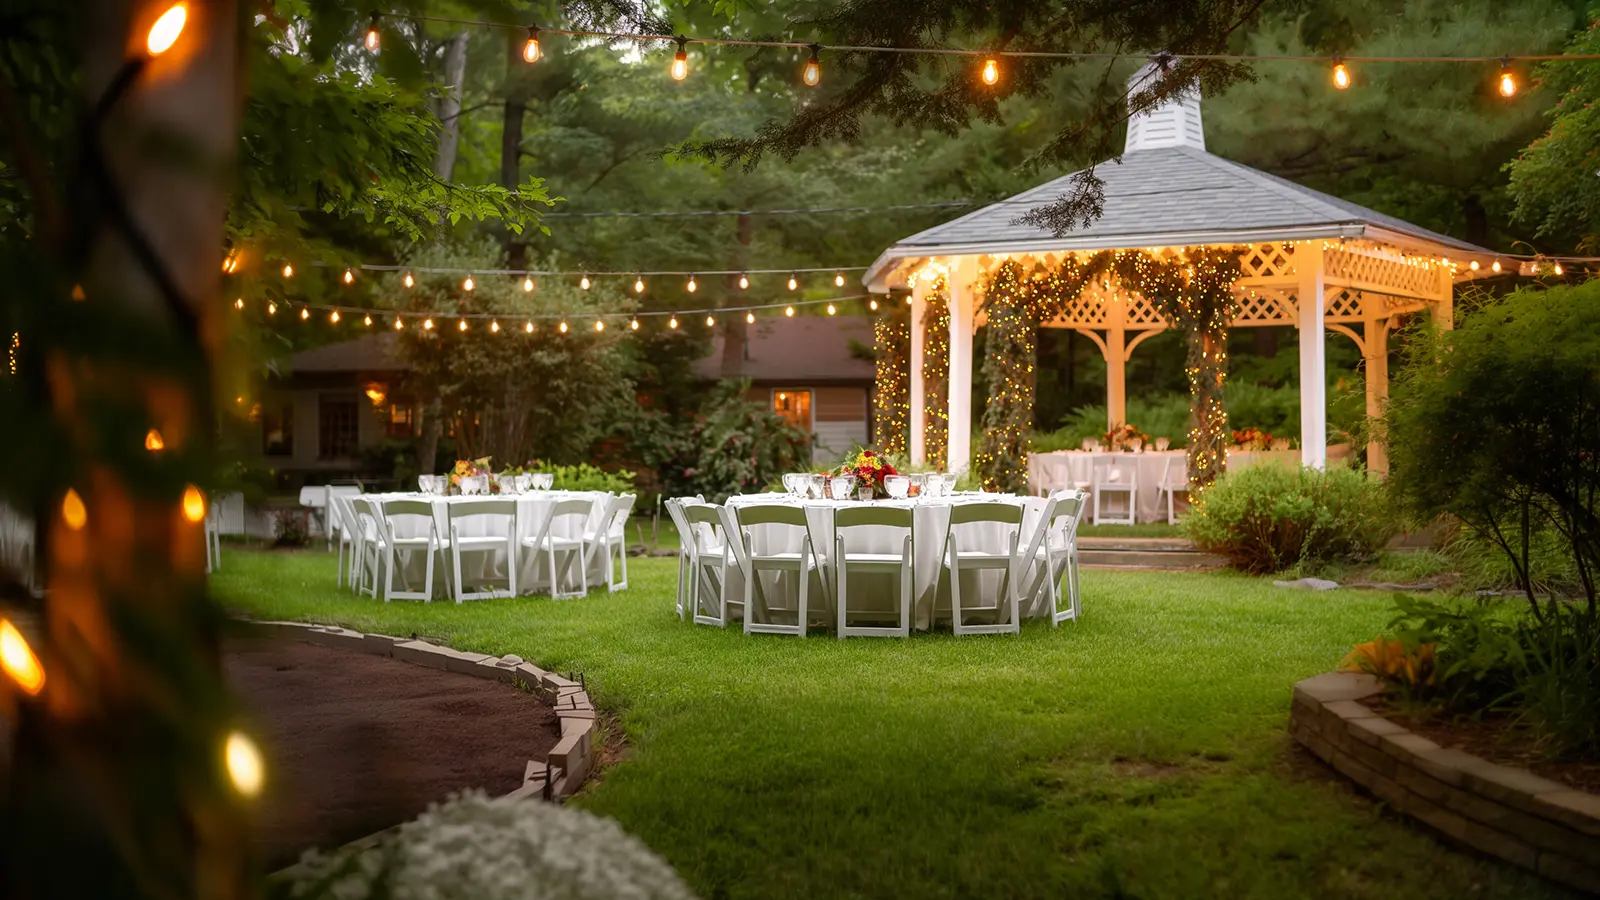 What to Look for in a Wedding Venue